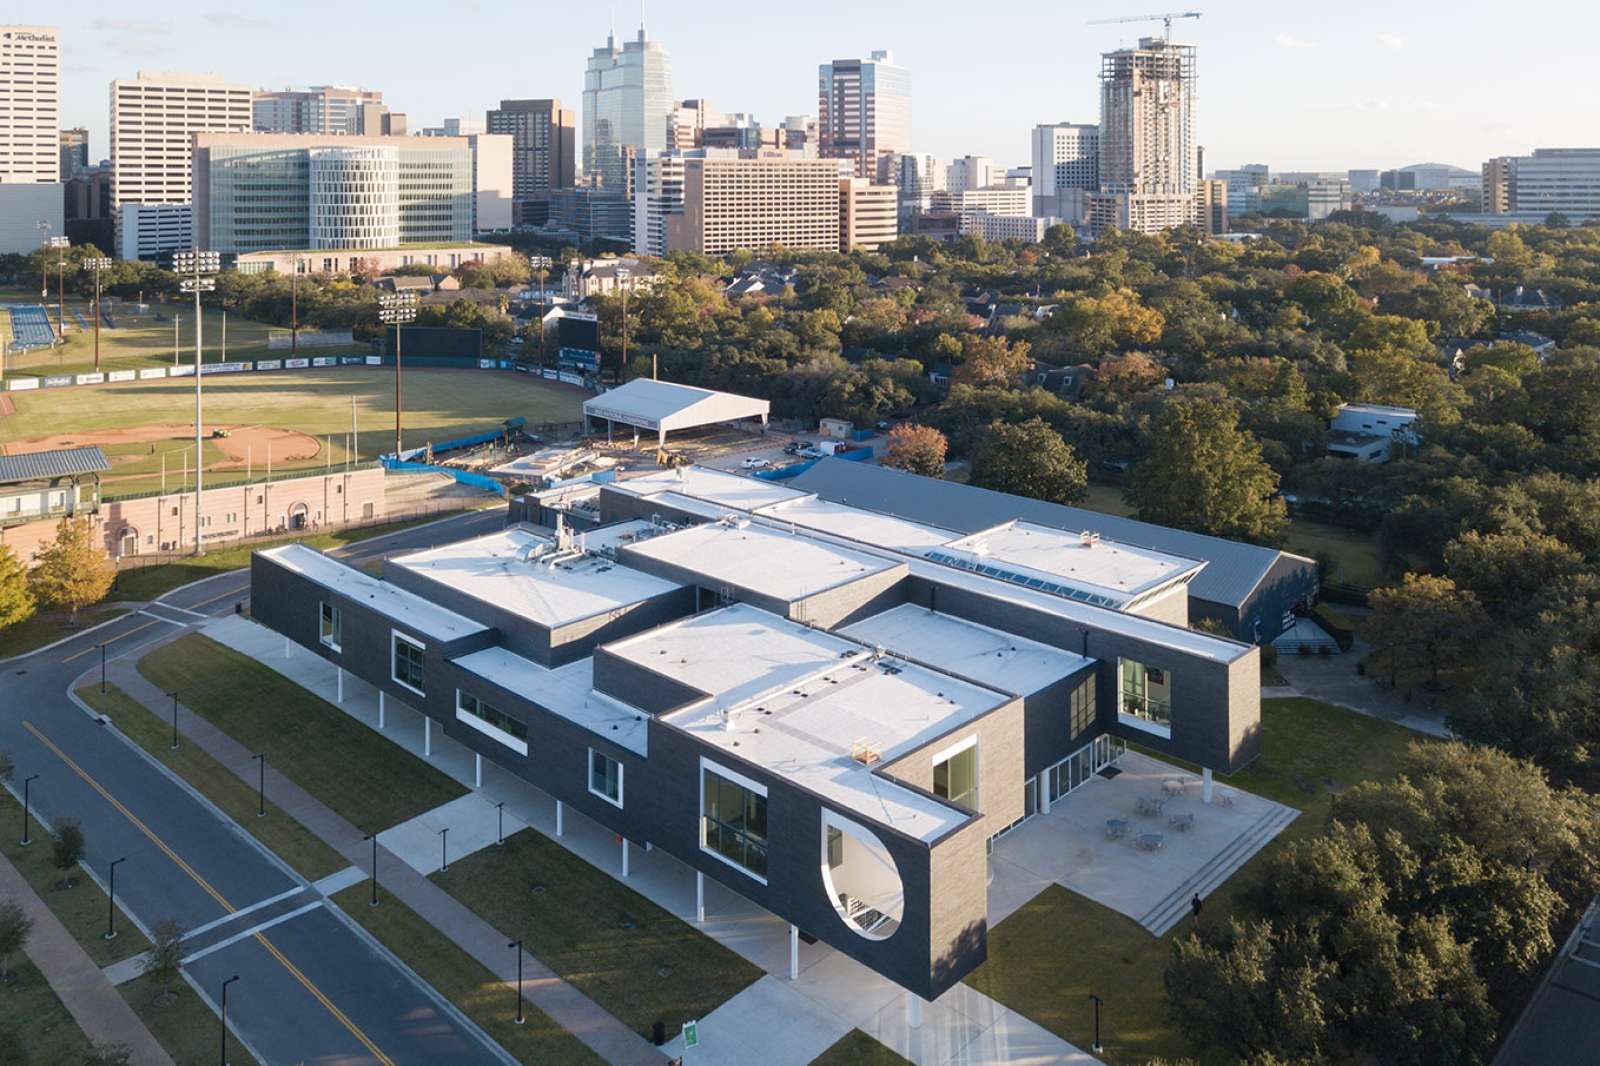 Moody Center for the Arts (aerial view). Photo: Iwan Baan